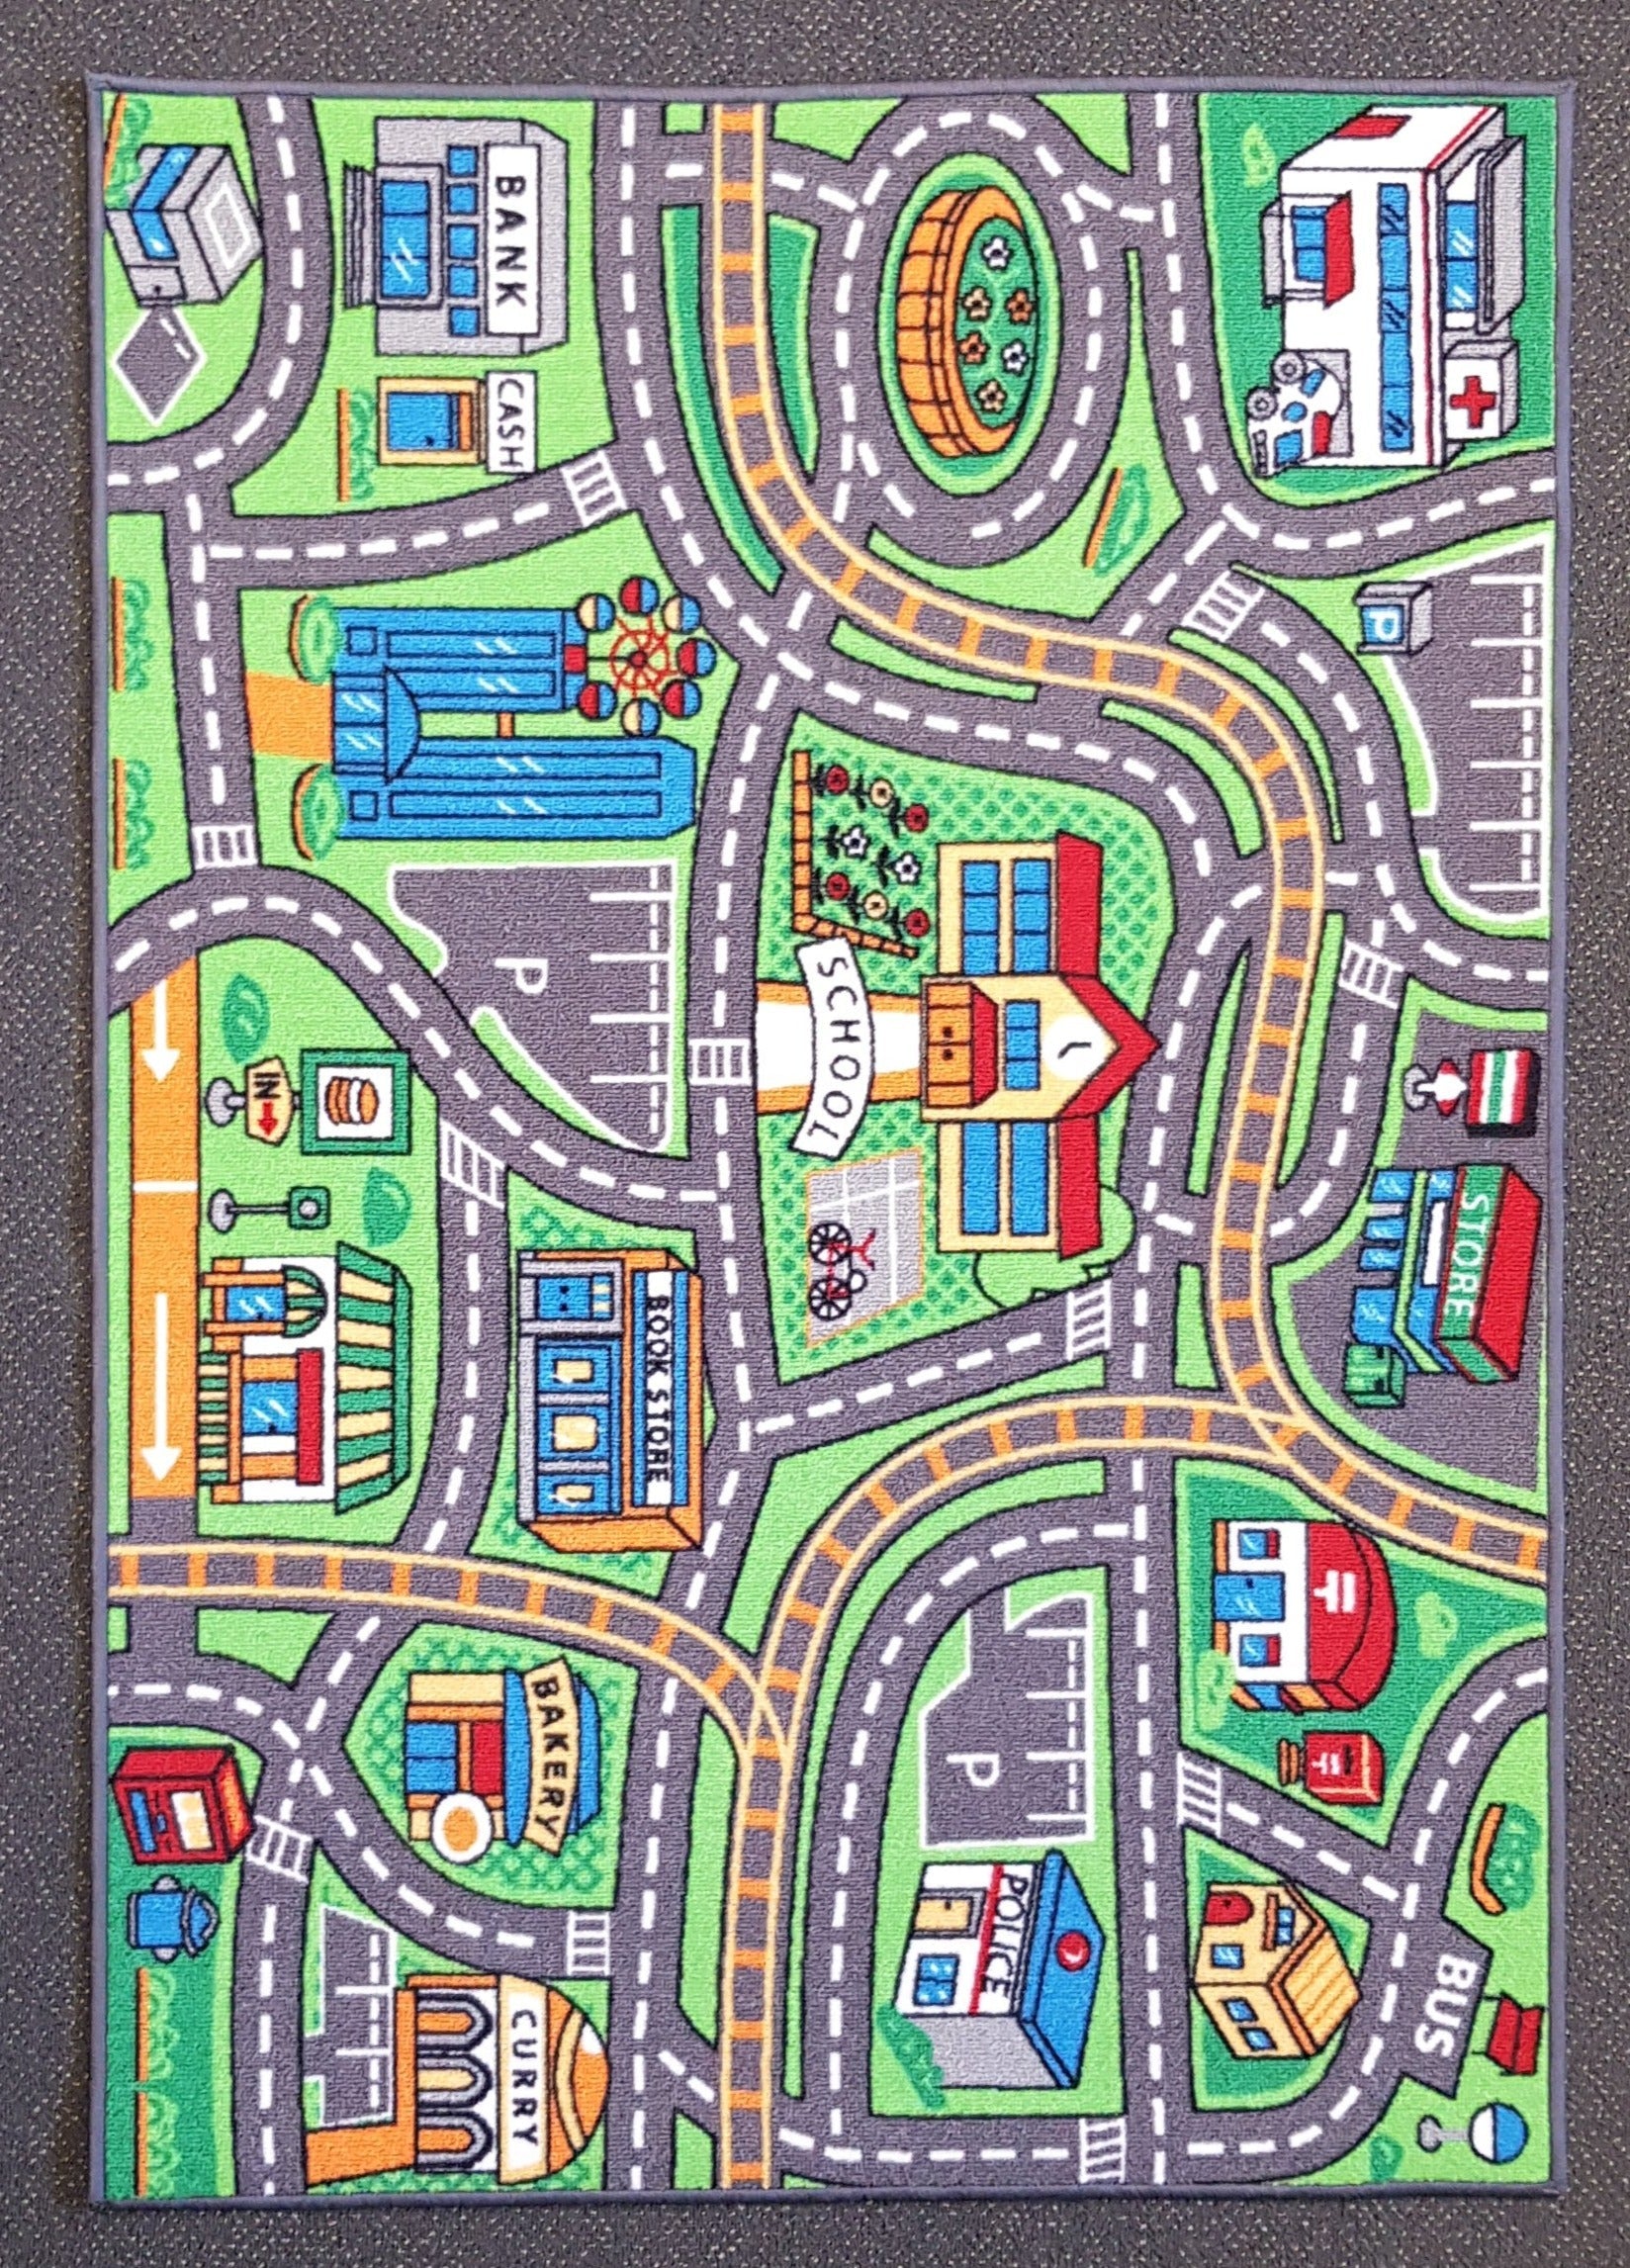 Suburb Kids Car Rug in Size 90cm x 130cm-Rugs 4 Less